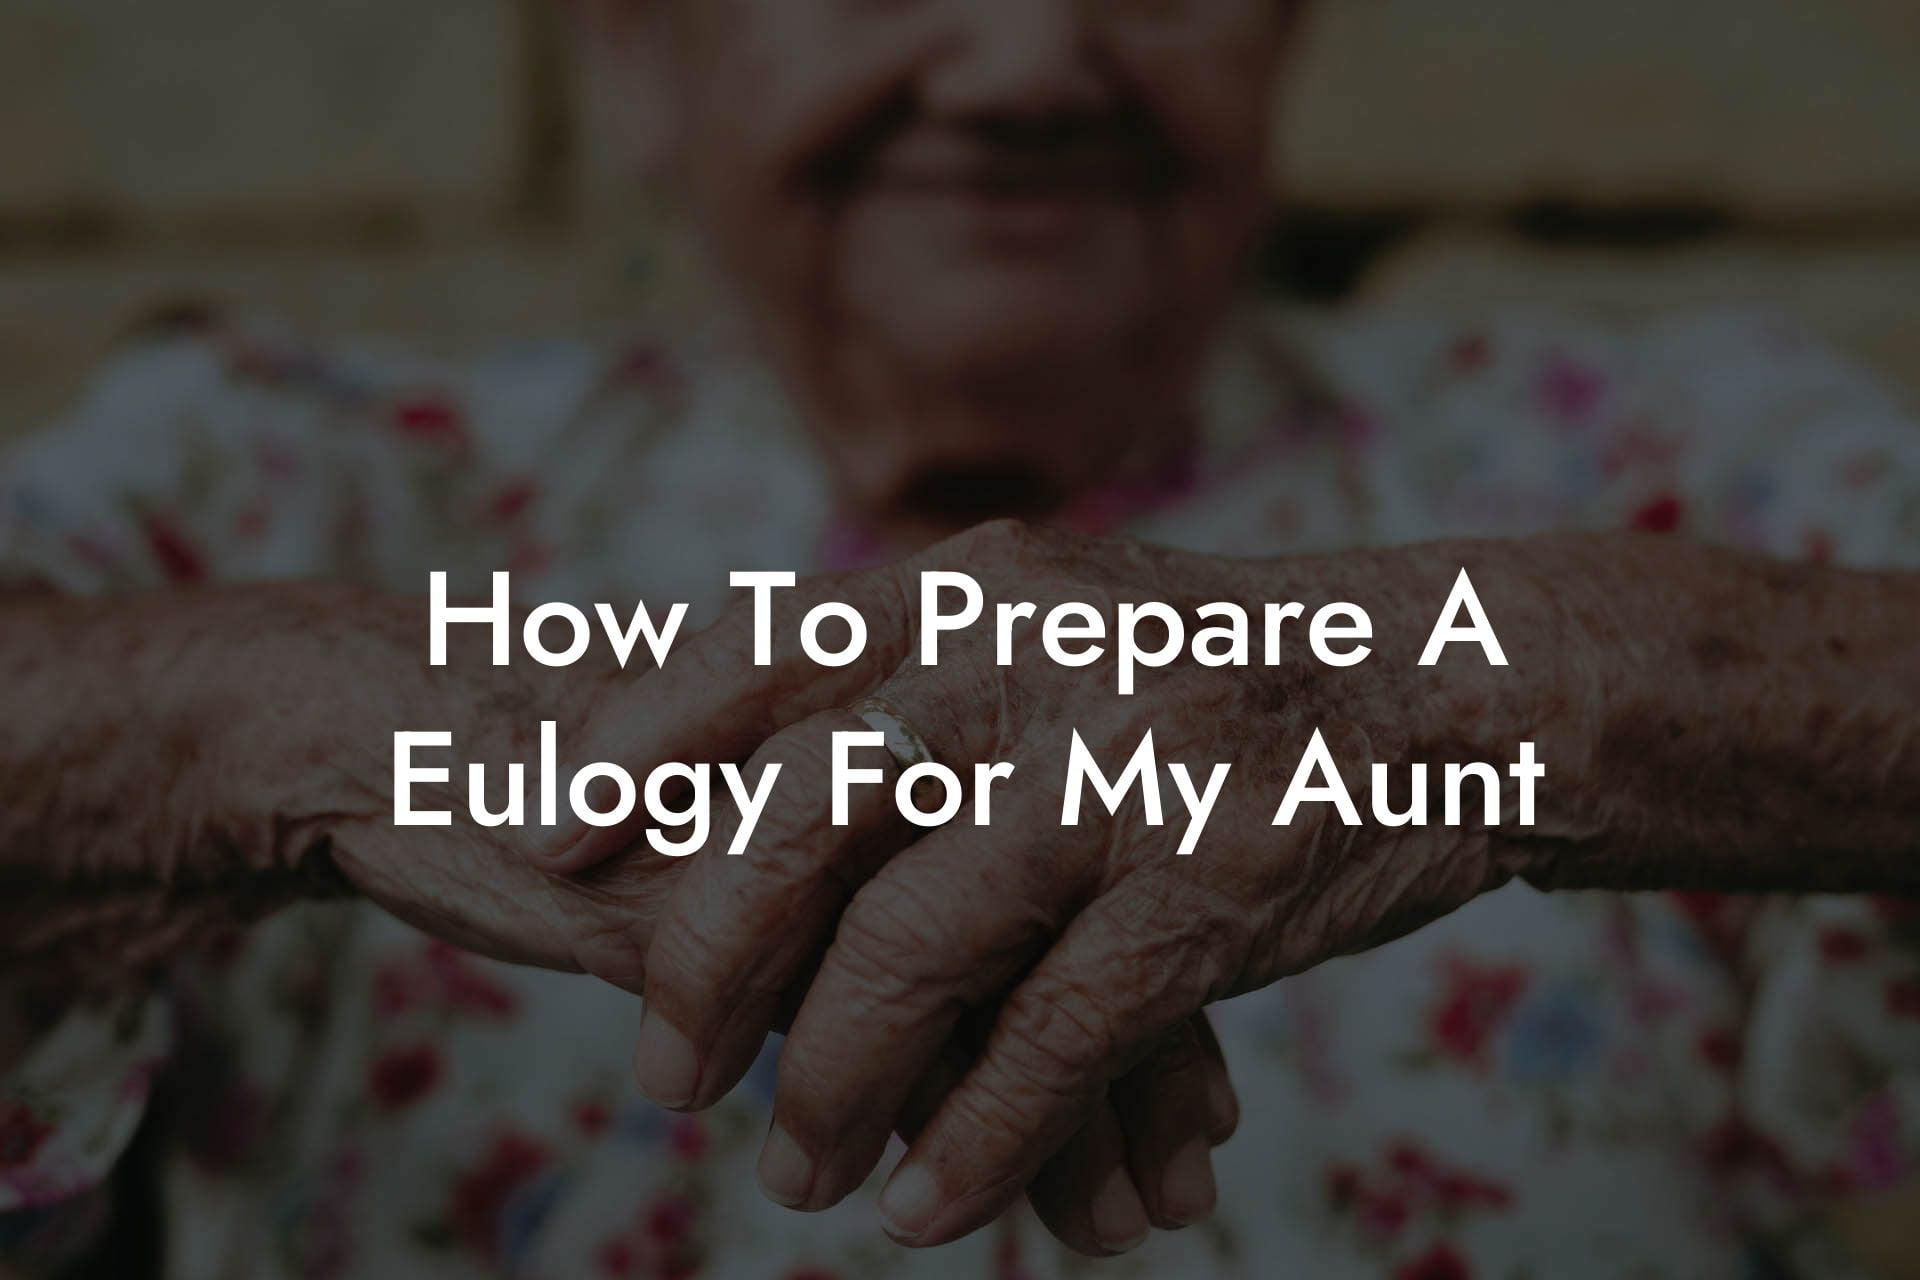 How To Prepare A Eulogy For My Aunt